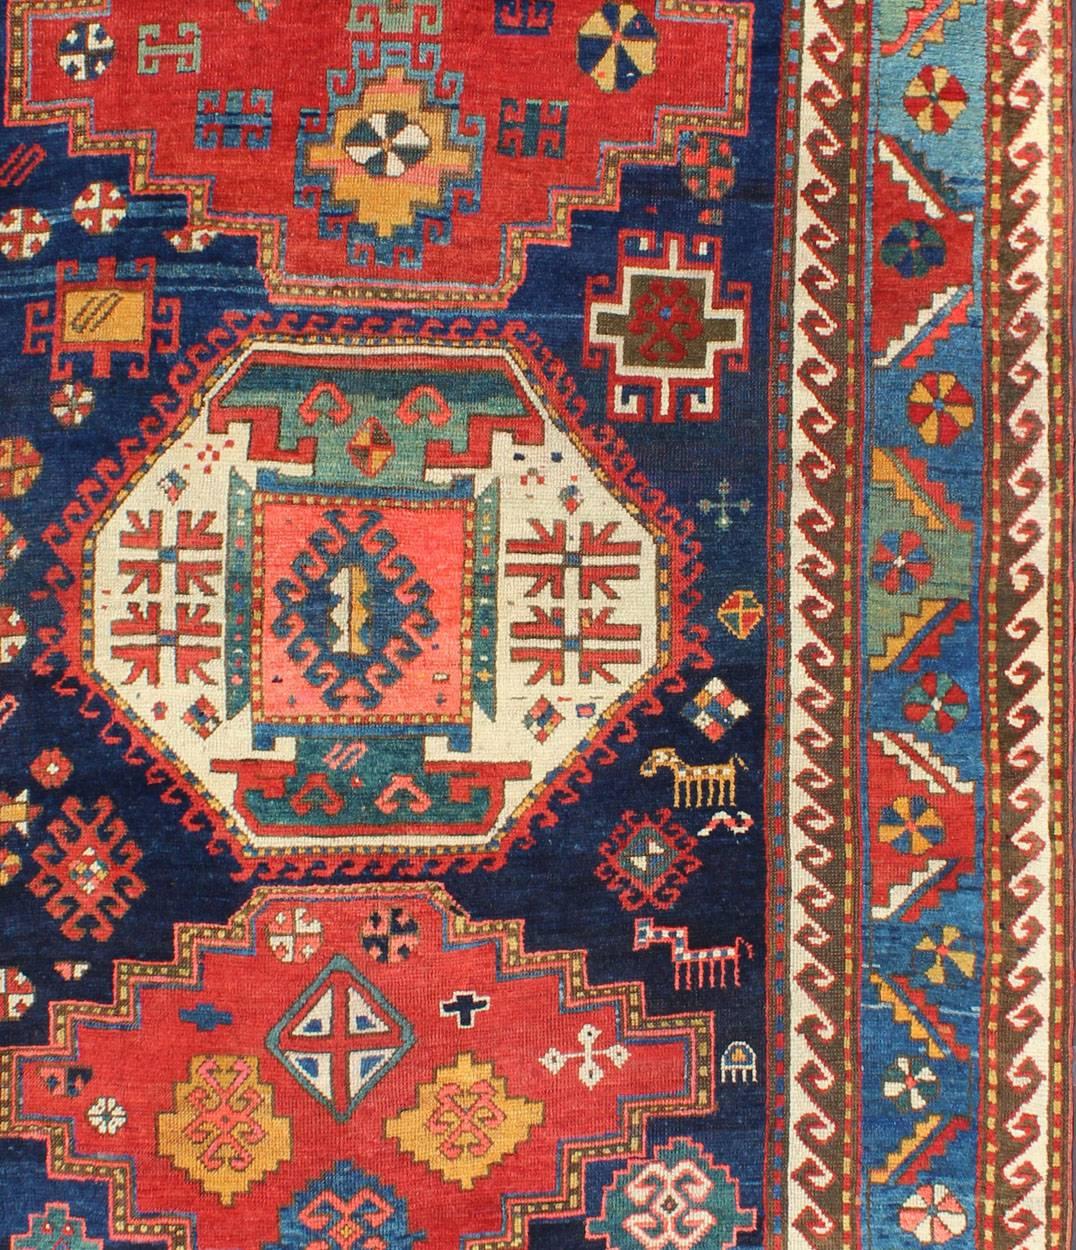 In superb condition, this unique antique Caucasian carpet, a striking, jewel-toned Lori Pambak piece, epitomizes the riveting artistry and color palette commonly utilized by this Kazak weaving region. The Caucasian weavers are renowned for the